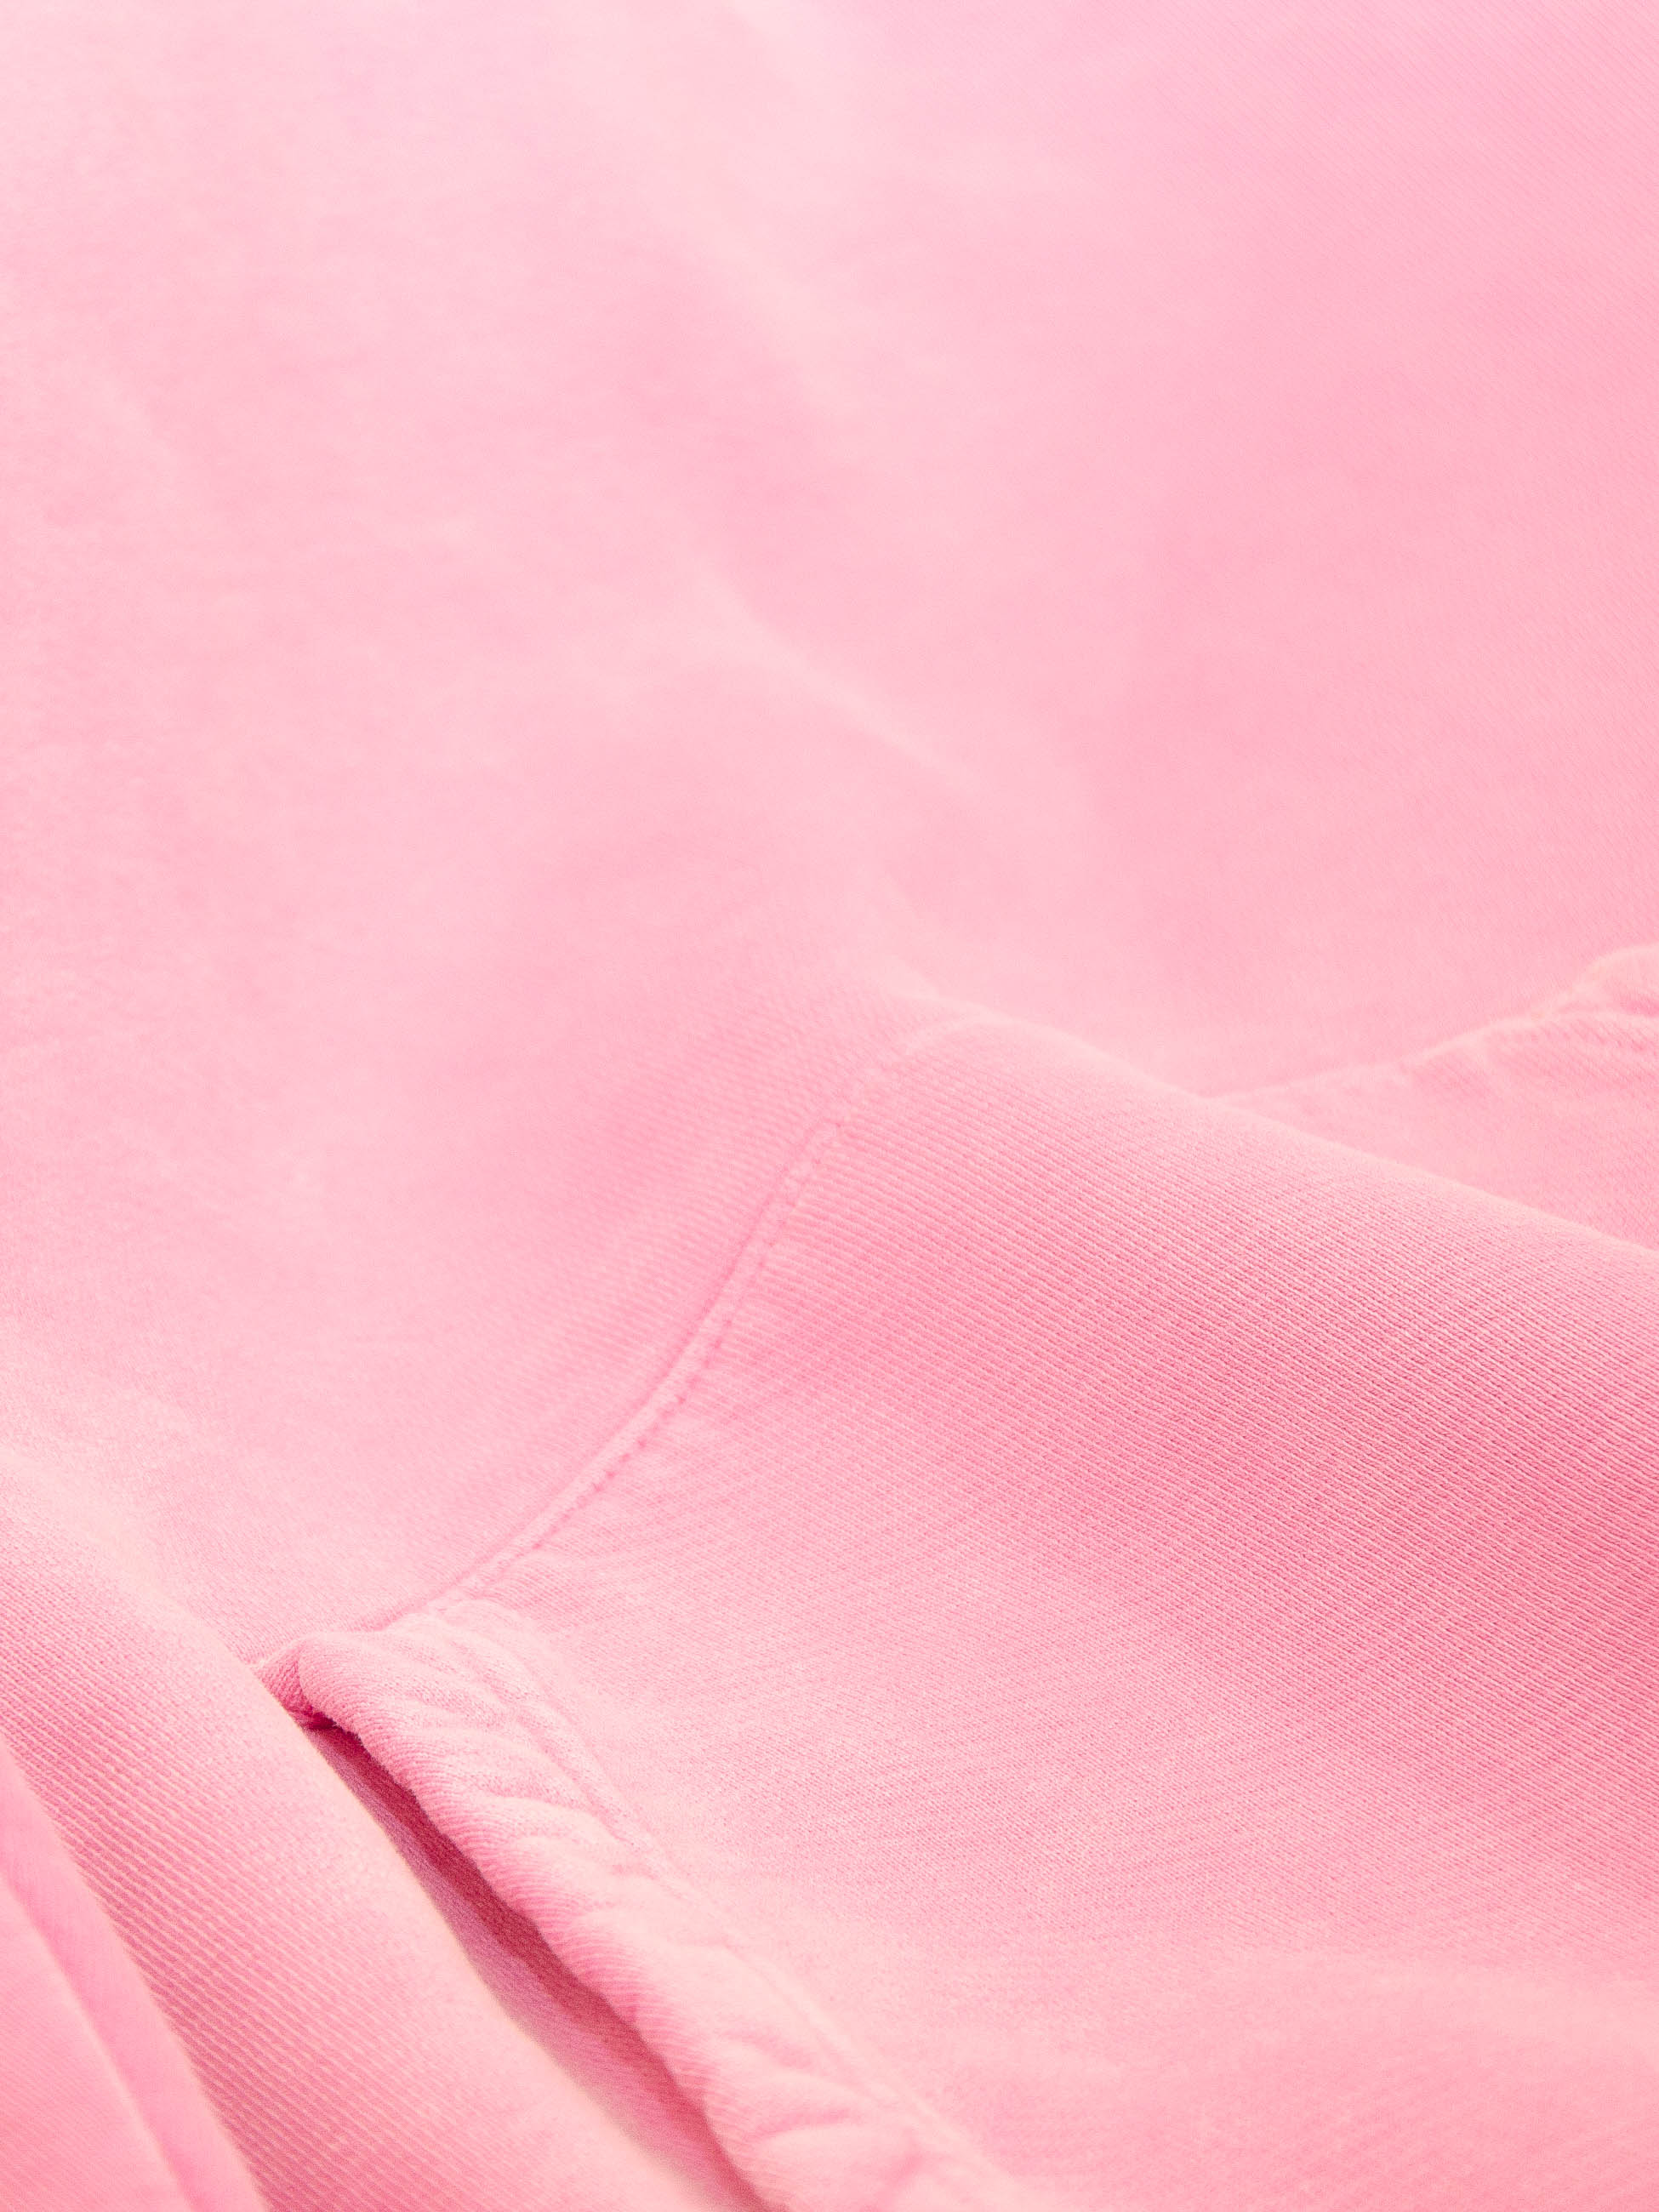 Publik Brand Single Layered Hoodie Hollywood Cerise Pink Heavyweight Fleece, all made in USA, fabric detail, texture, softness